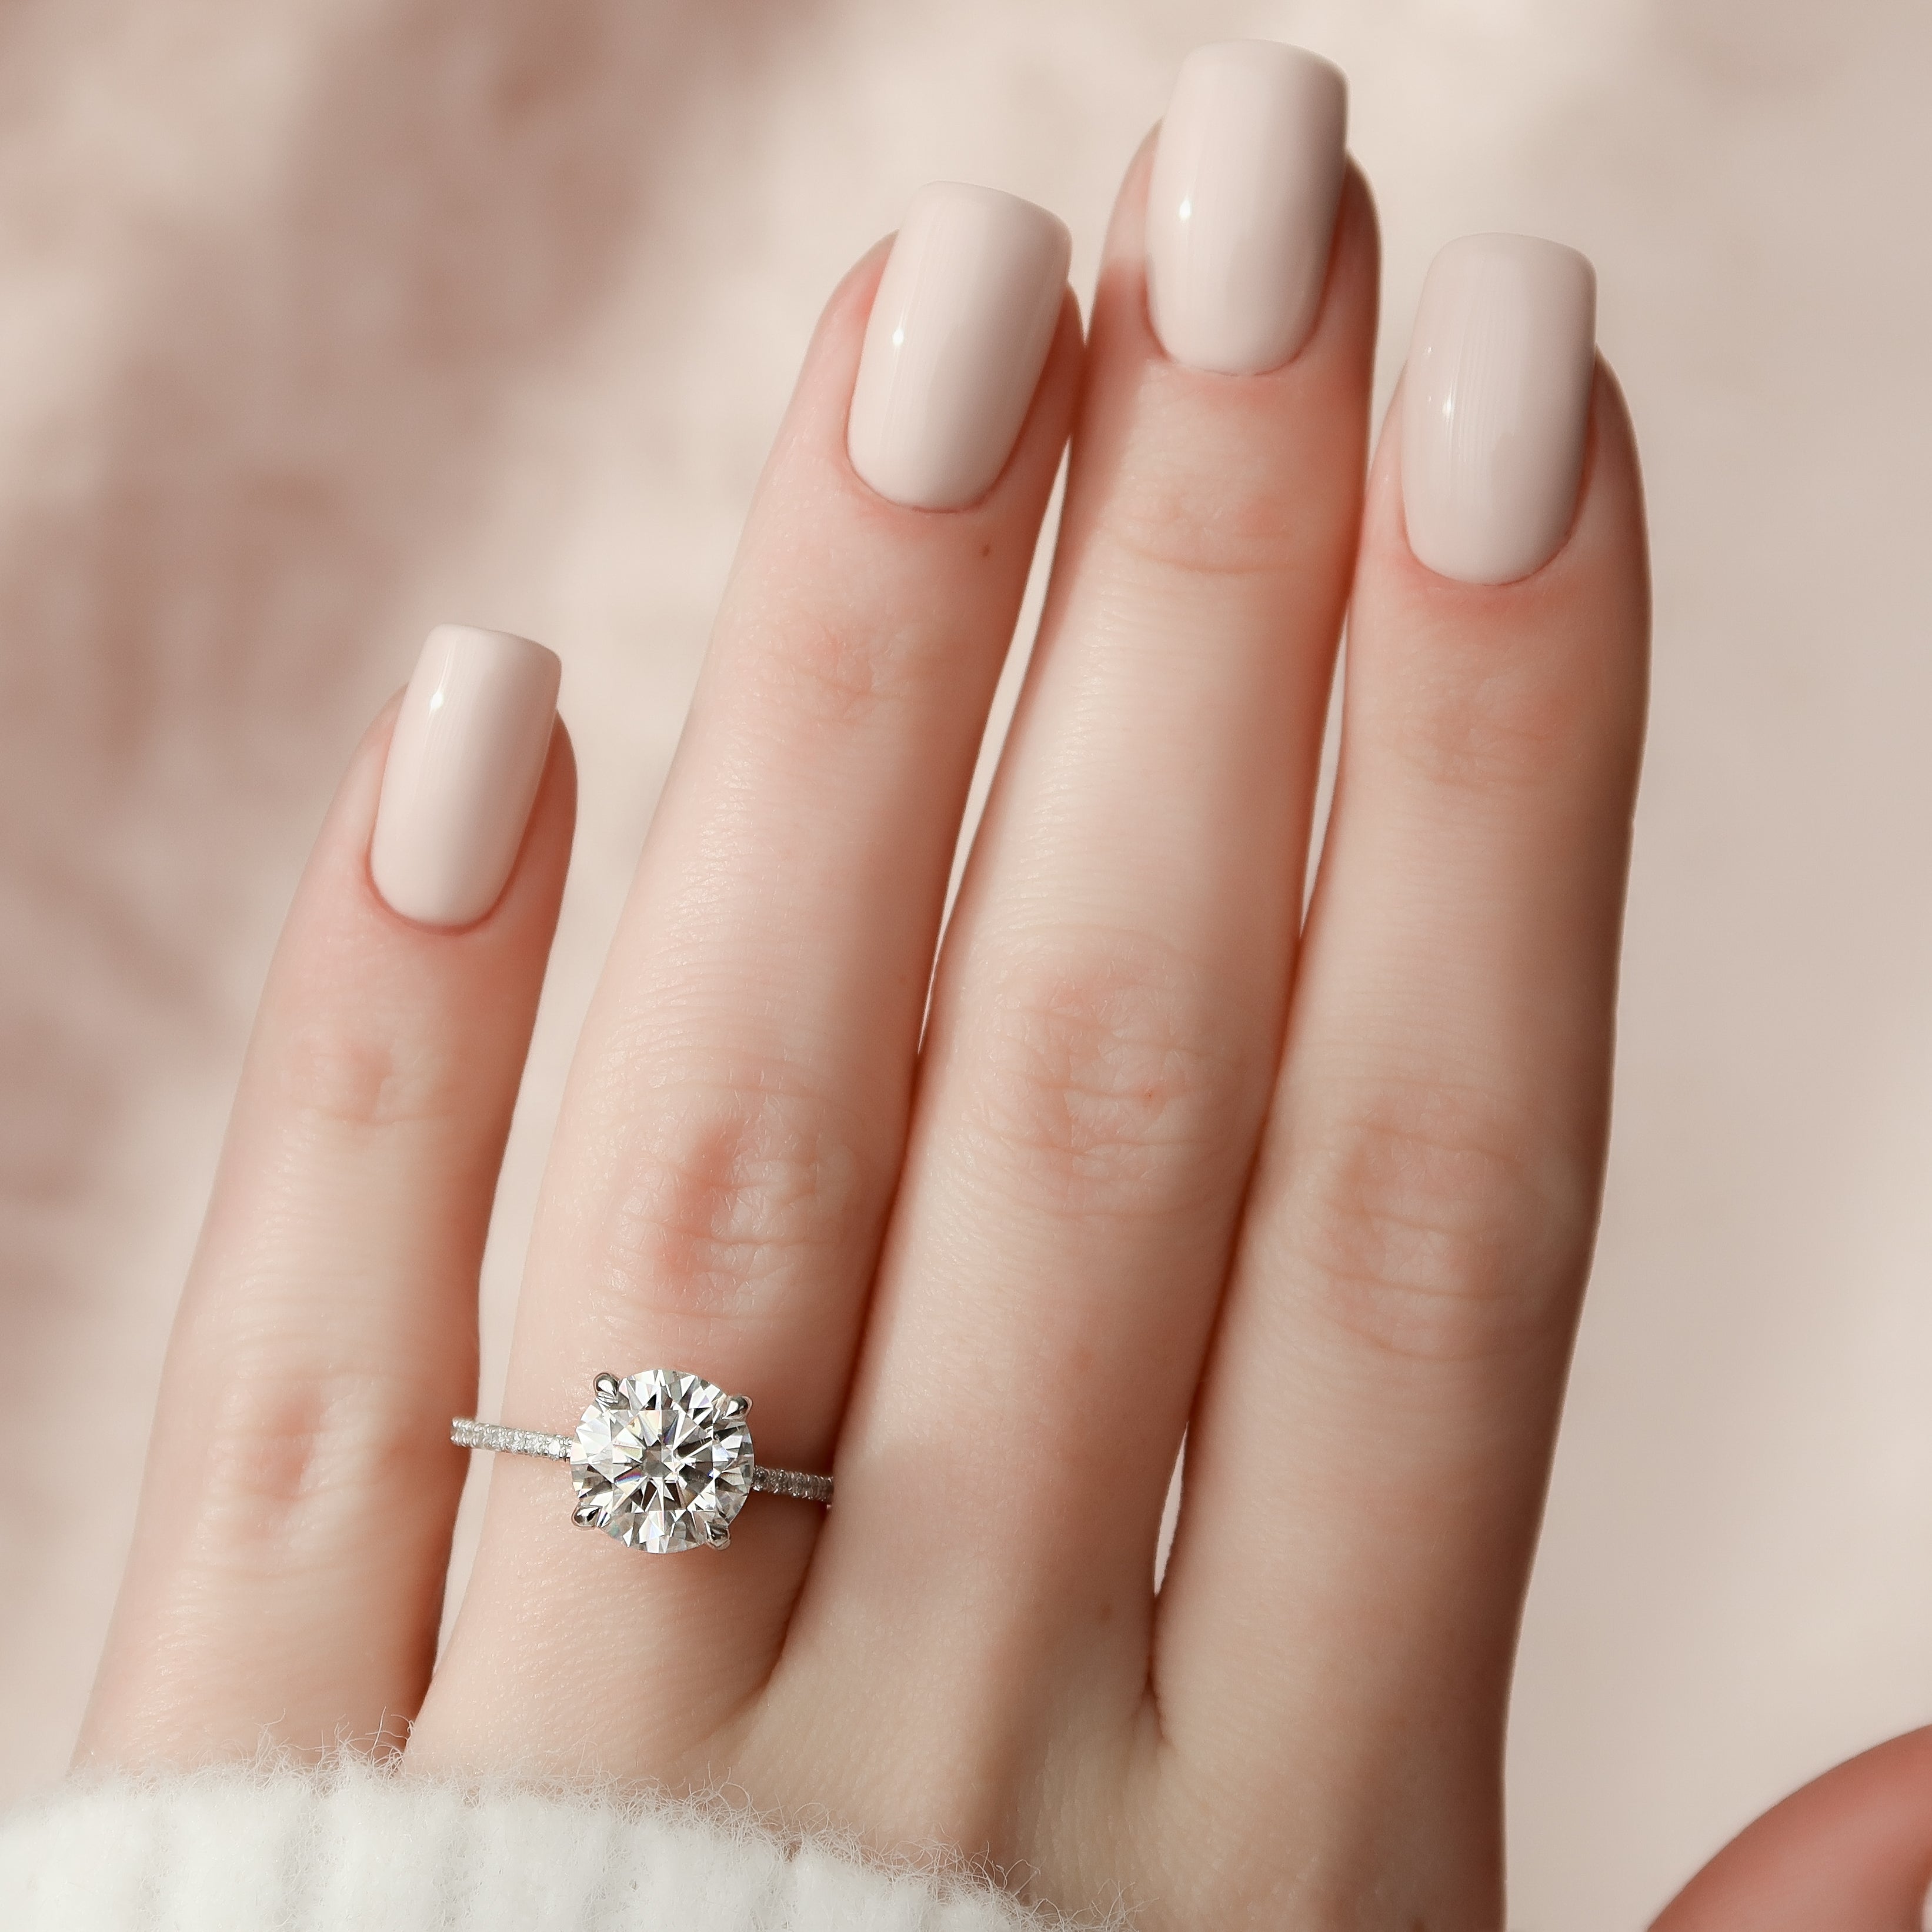 The Best Fake Diamond Engagment Rings That Look Real